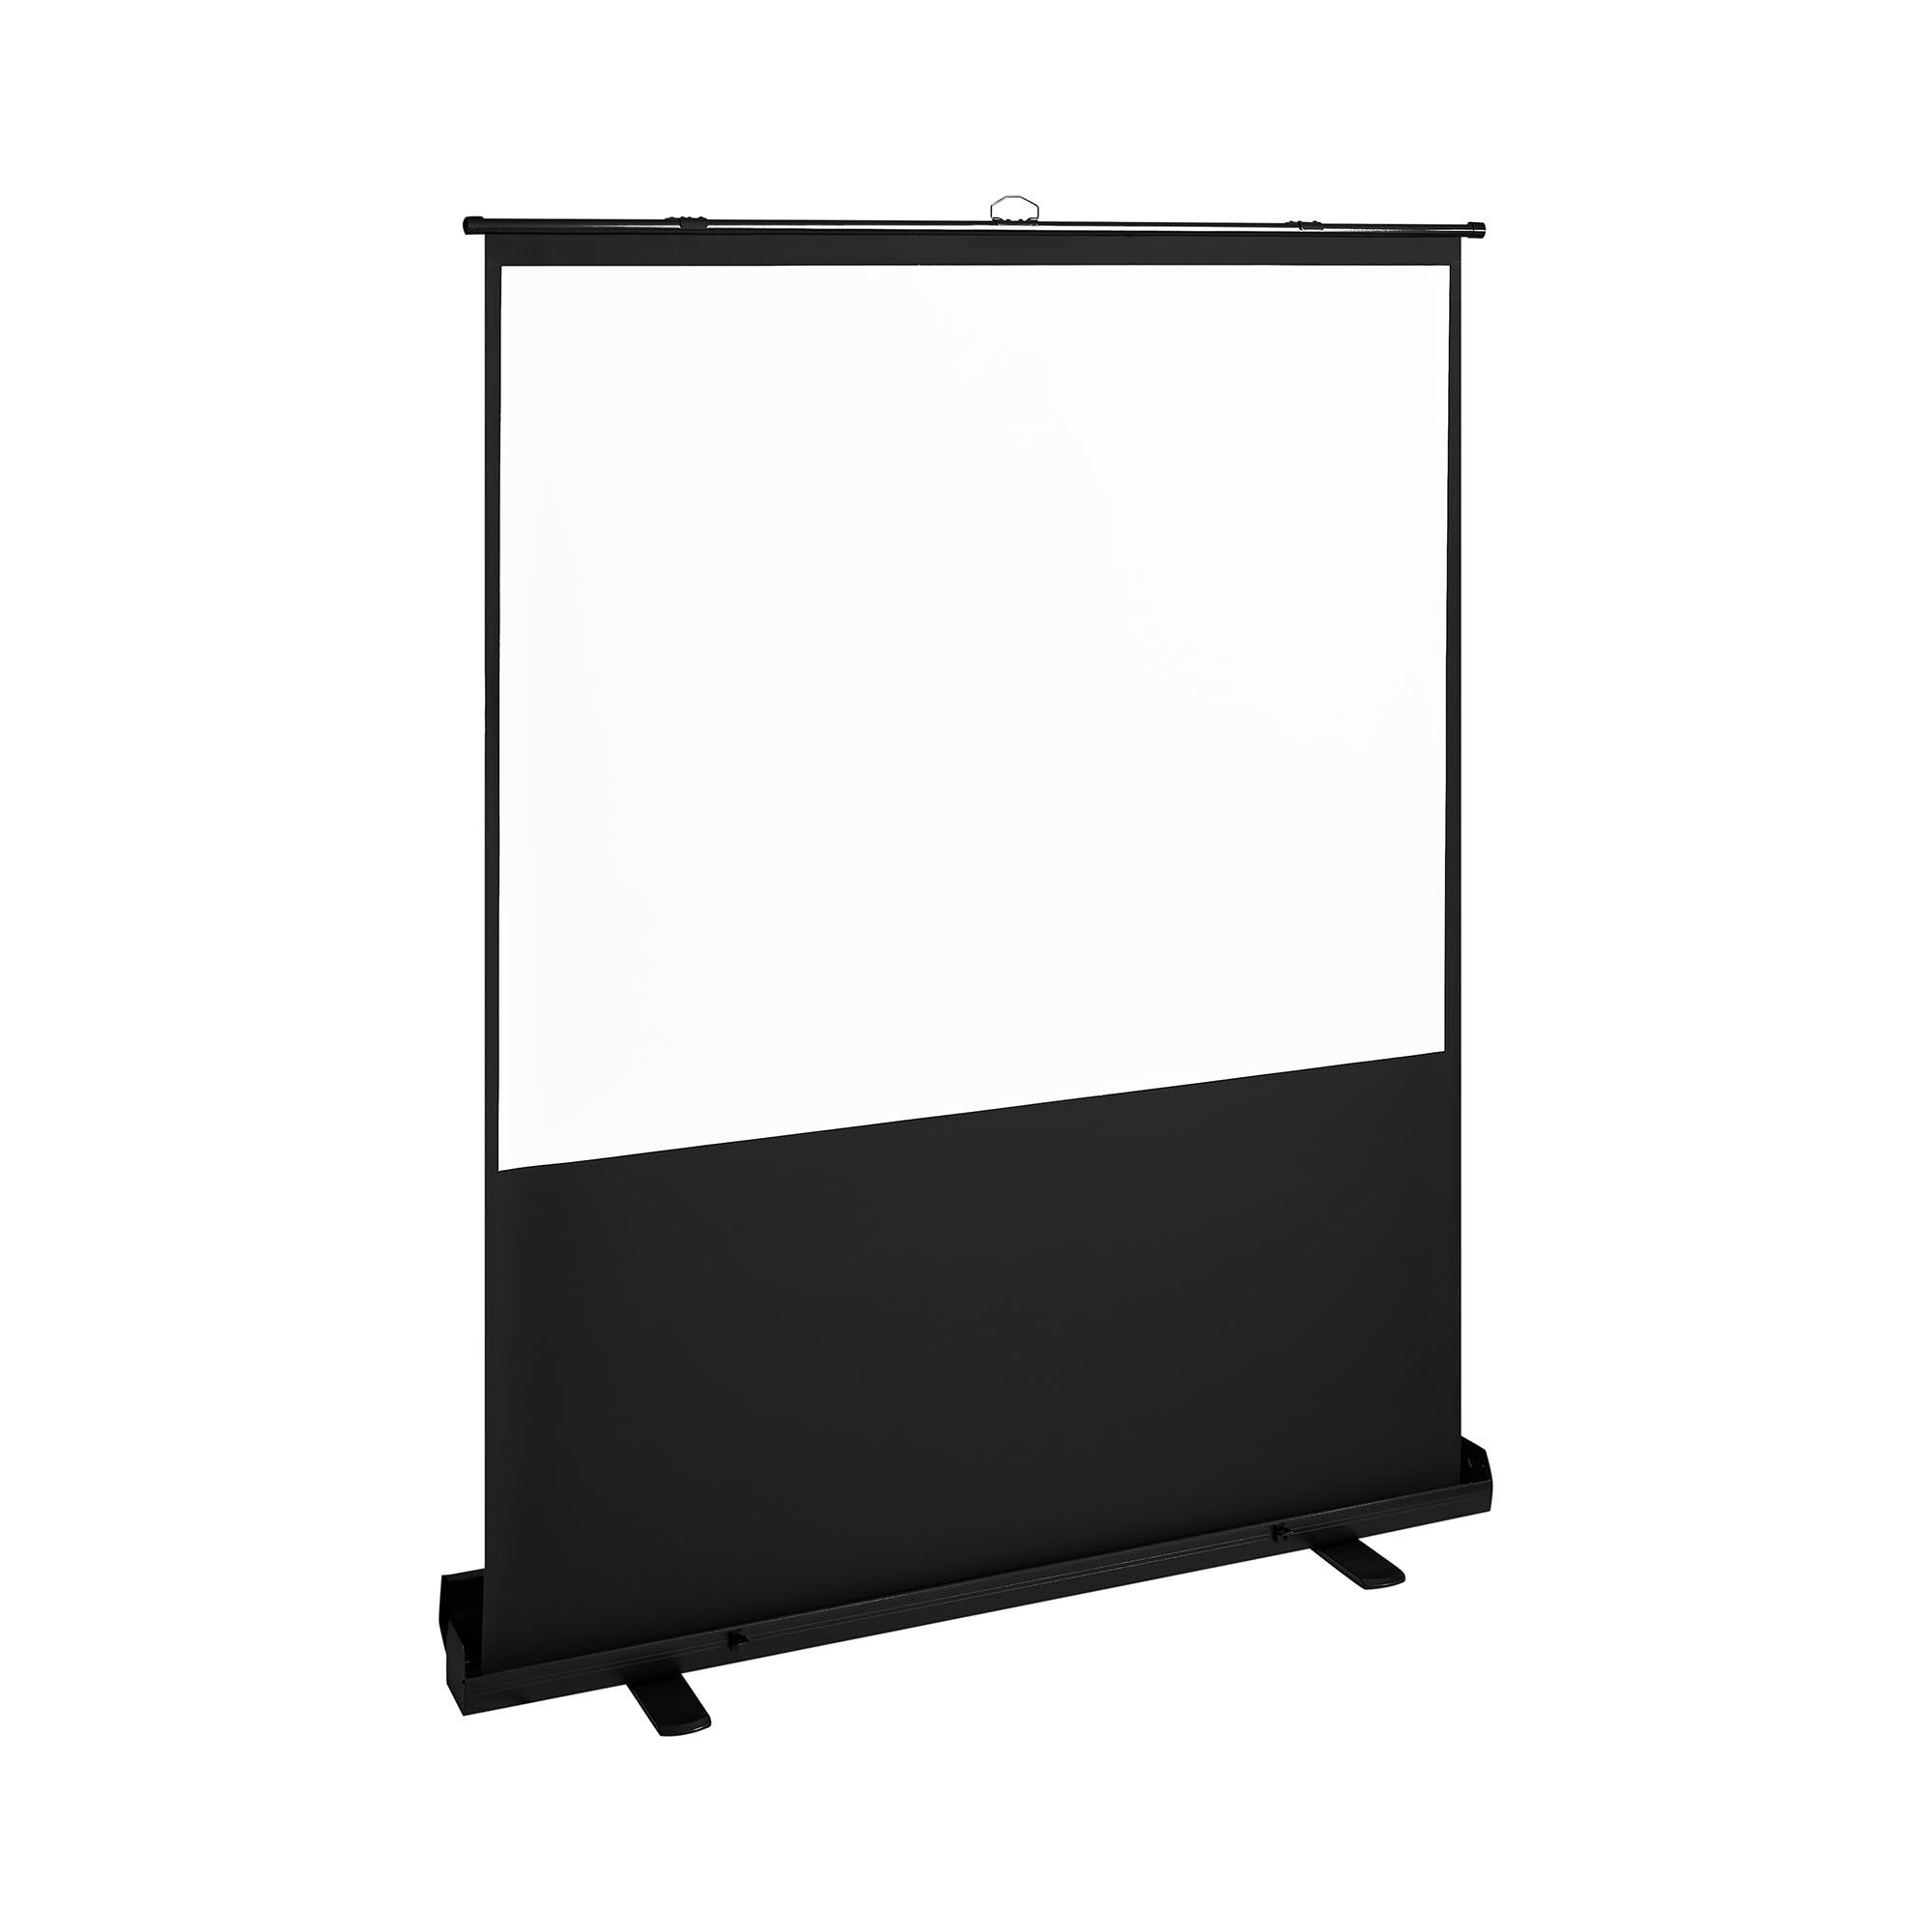 Fromm & Starck Roll-up Projector Screen - 174 x 203 cm - 4:3 - mobile